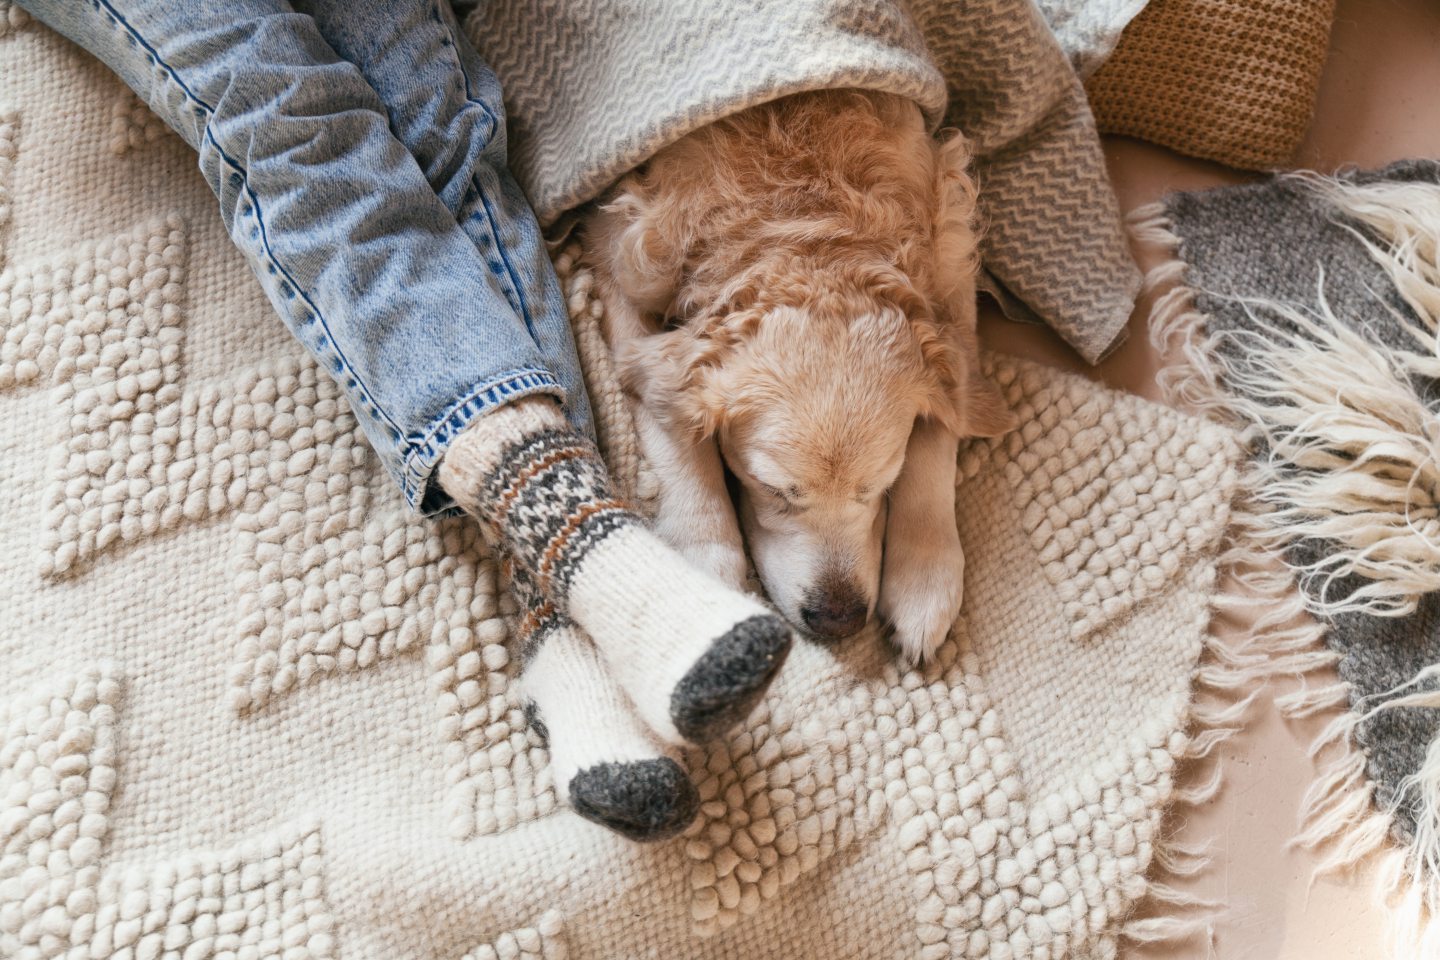 Stock image of dog and owner in blanket.